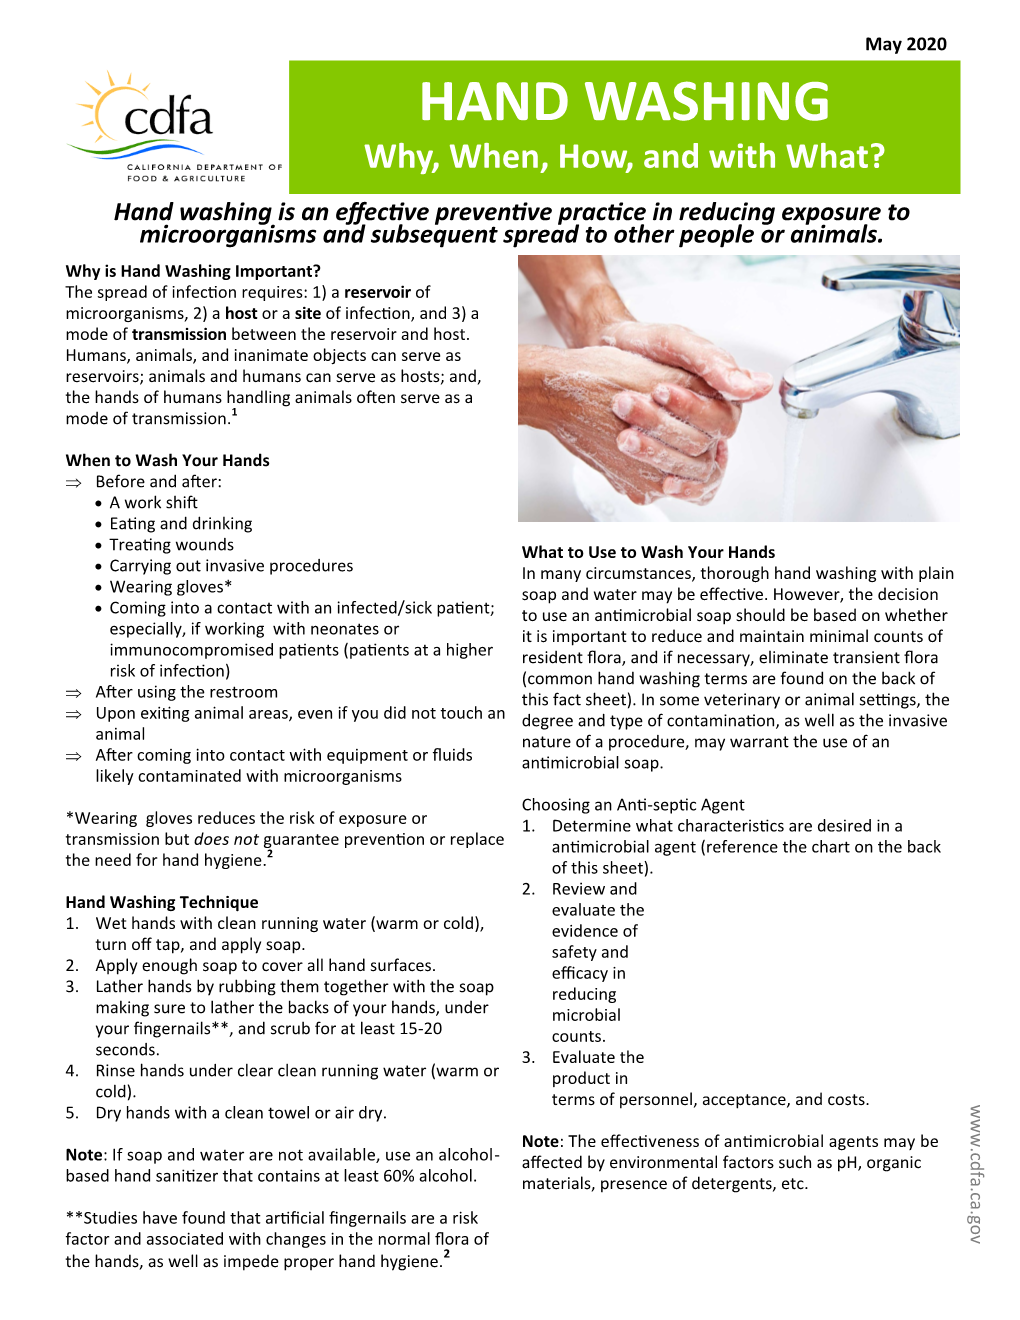 Hand Washing: Why, When, How, and with What?